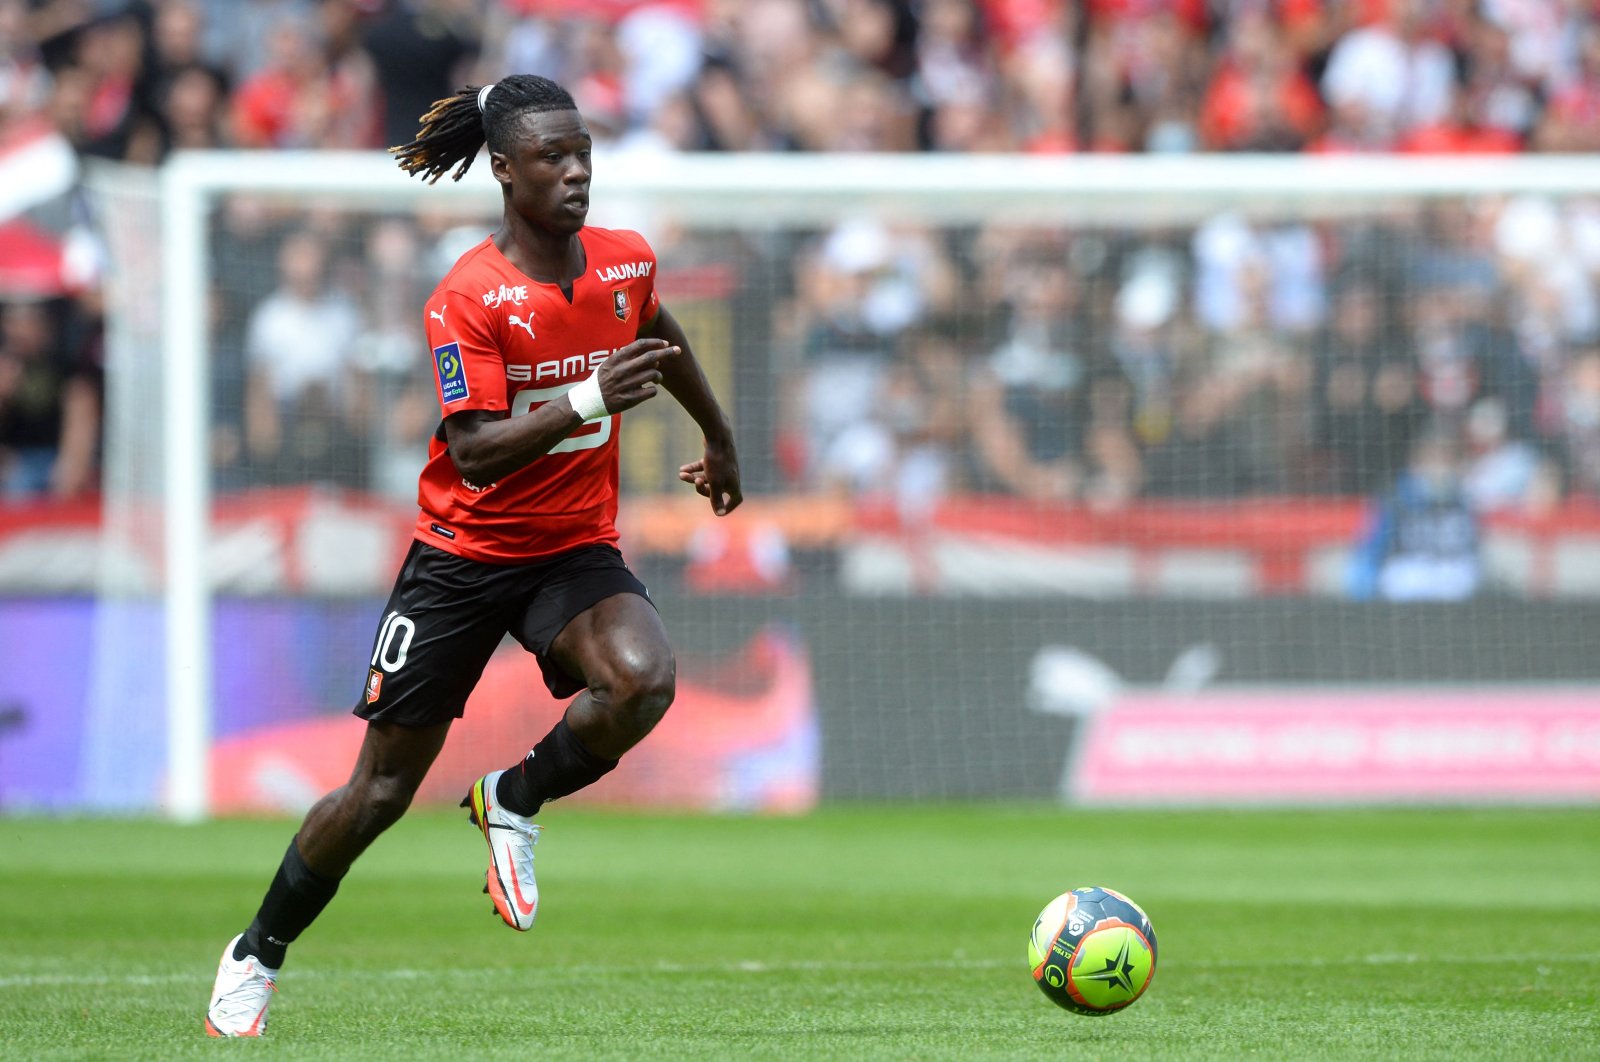 Rennes' French midfielder Eduardo Camavinga runs with the ball during the Ligue 1 football match between Rennes and Lens at The Roazhon Park Stadium in Rennes, northern France, Aug. 8, 2021. (AFP Photo)